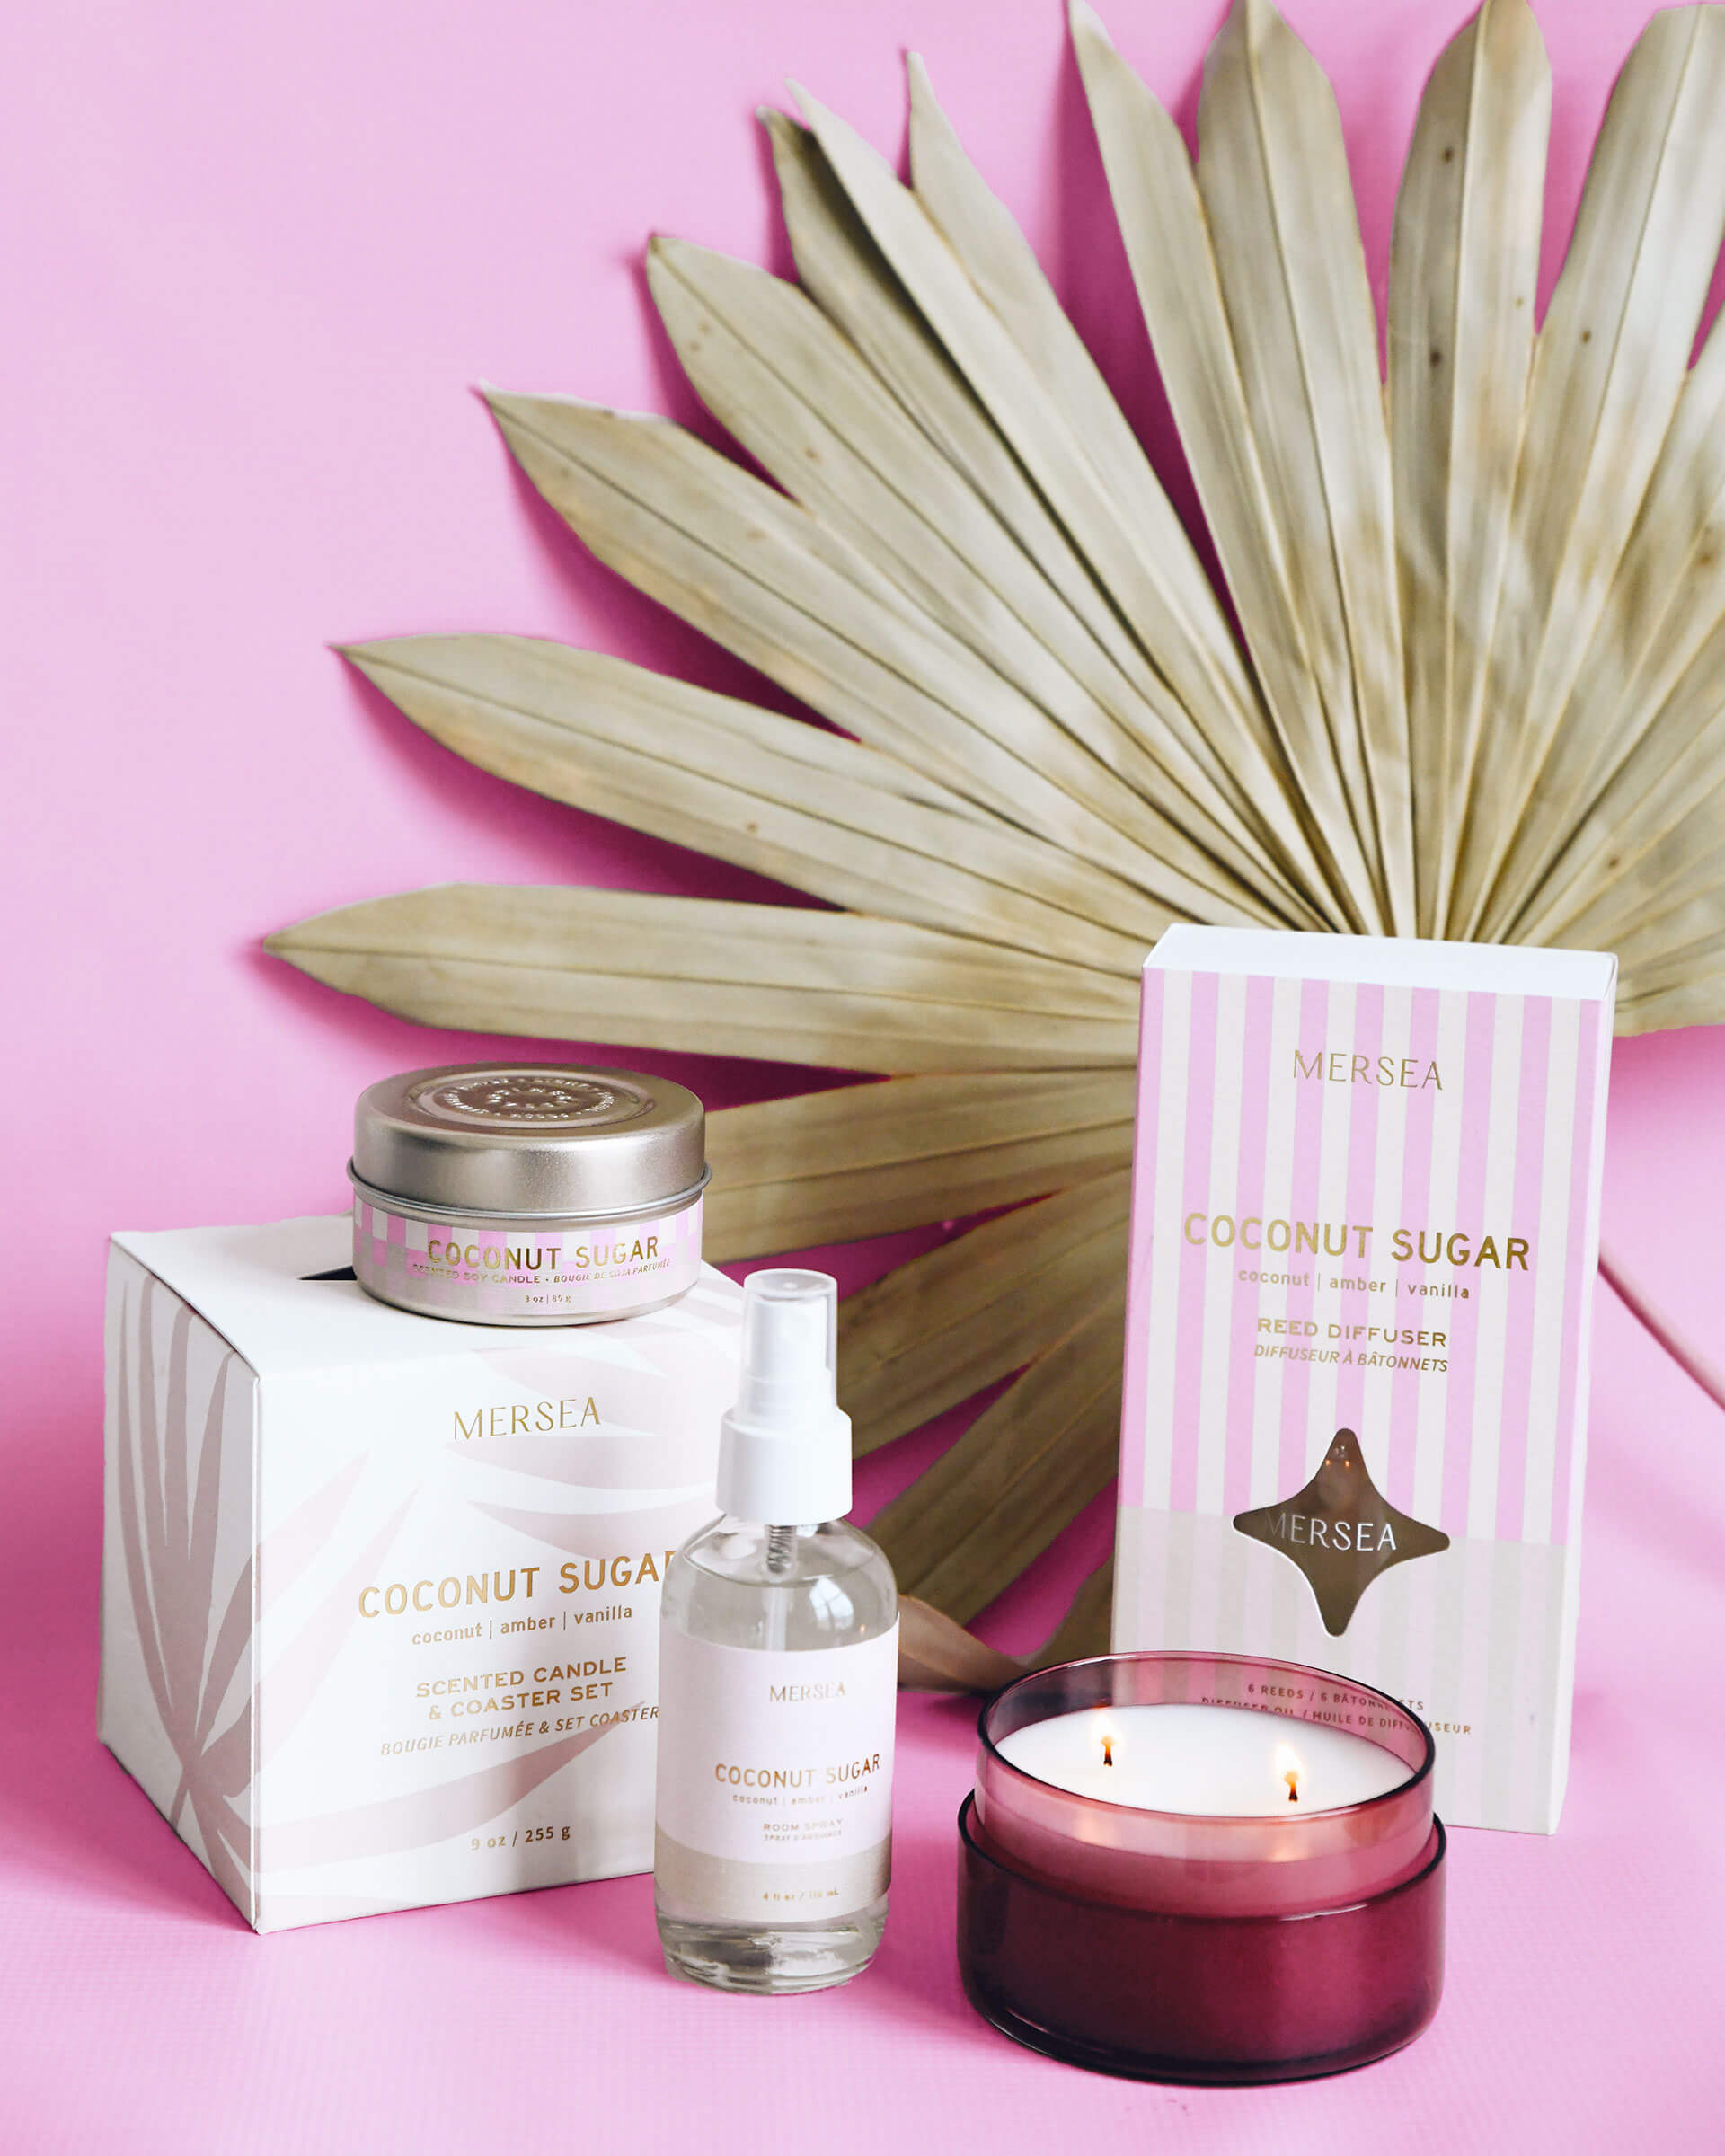 Coconut sugar product collection of candles, diffuser and room spray in front of pink background